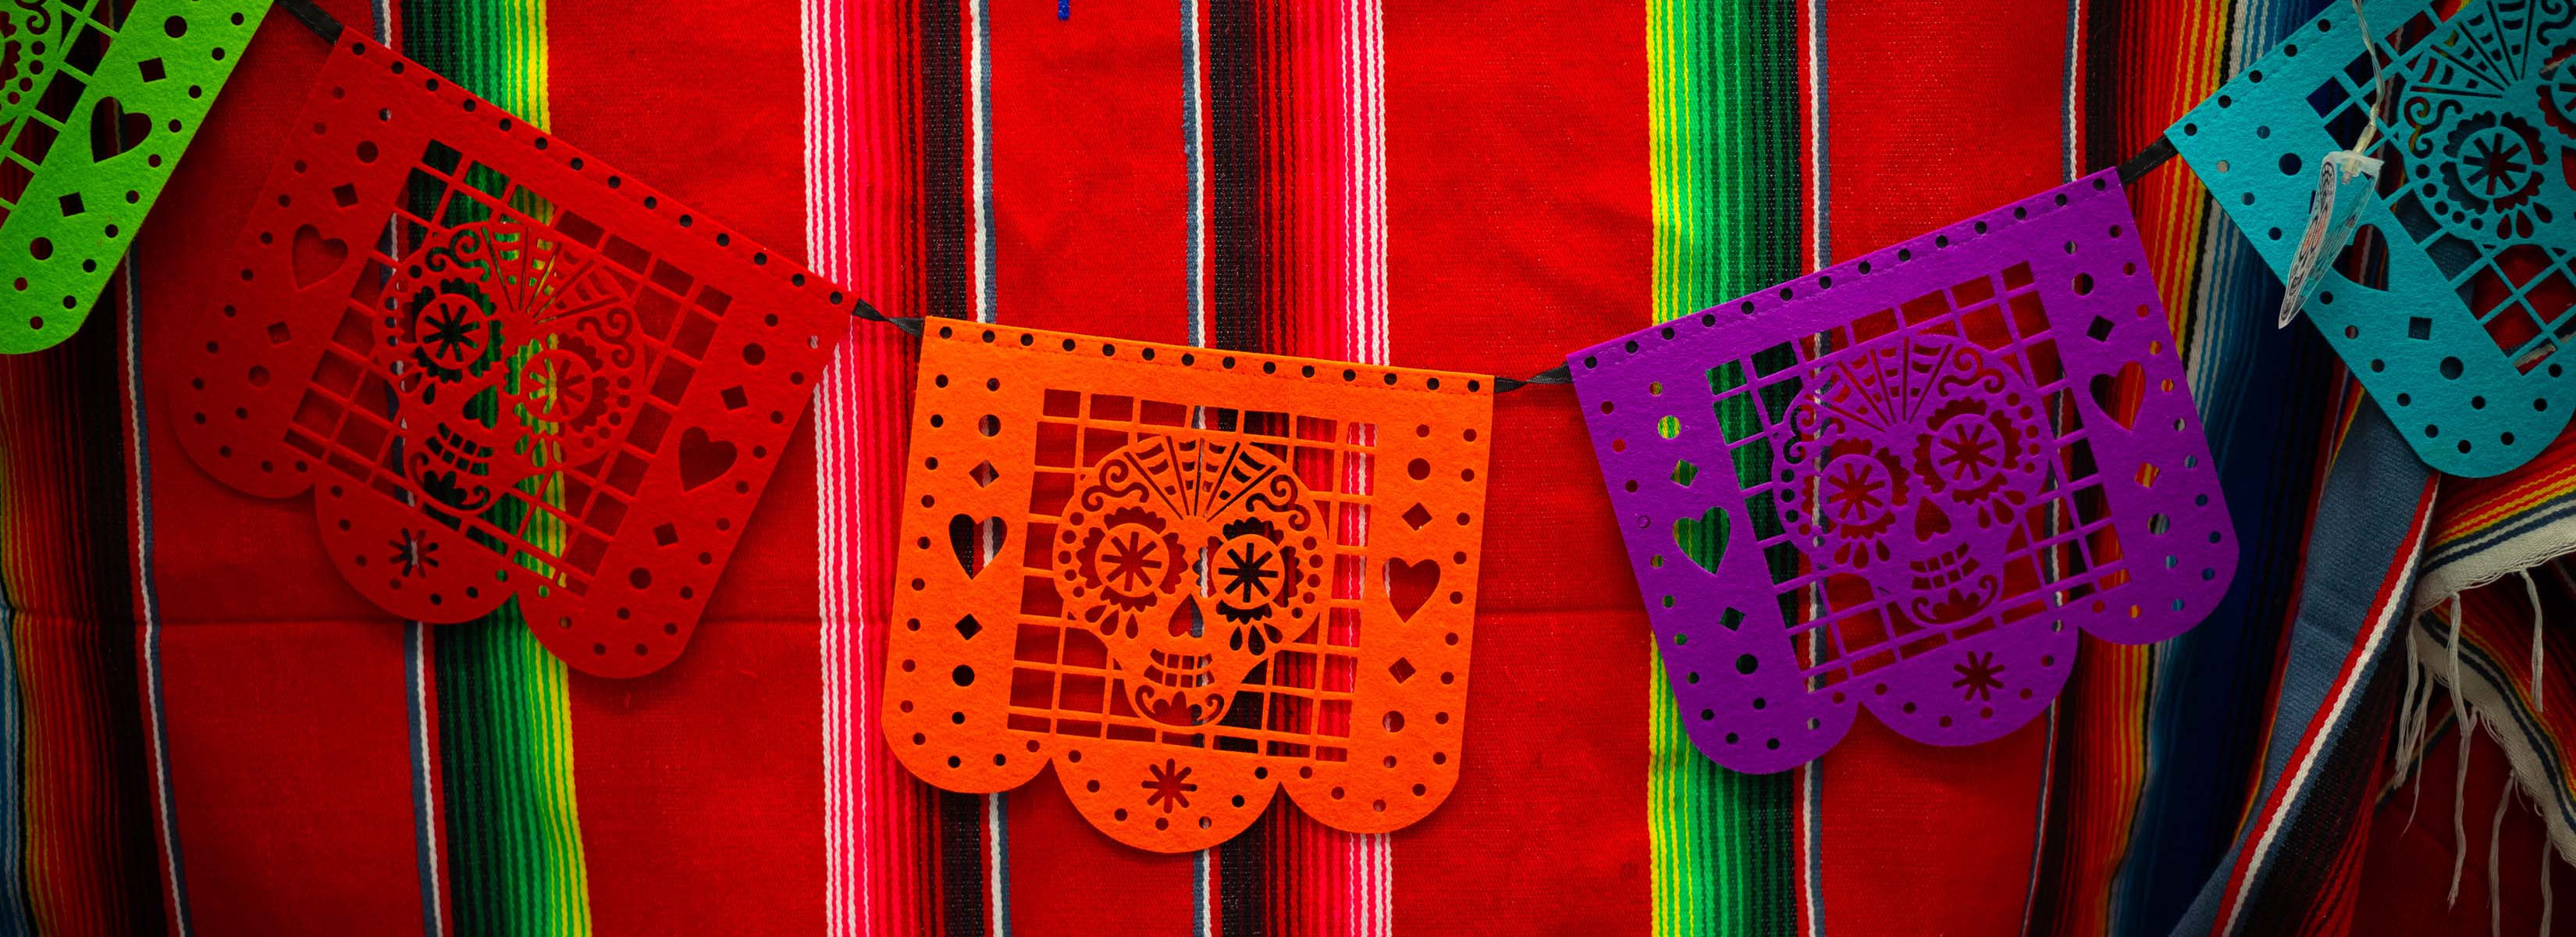 Traditional papel picado, or paper cutouts, used for Day of the Dead celebrations.